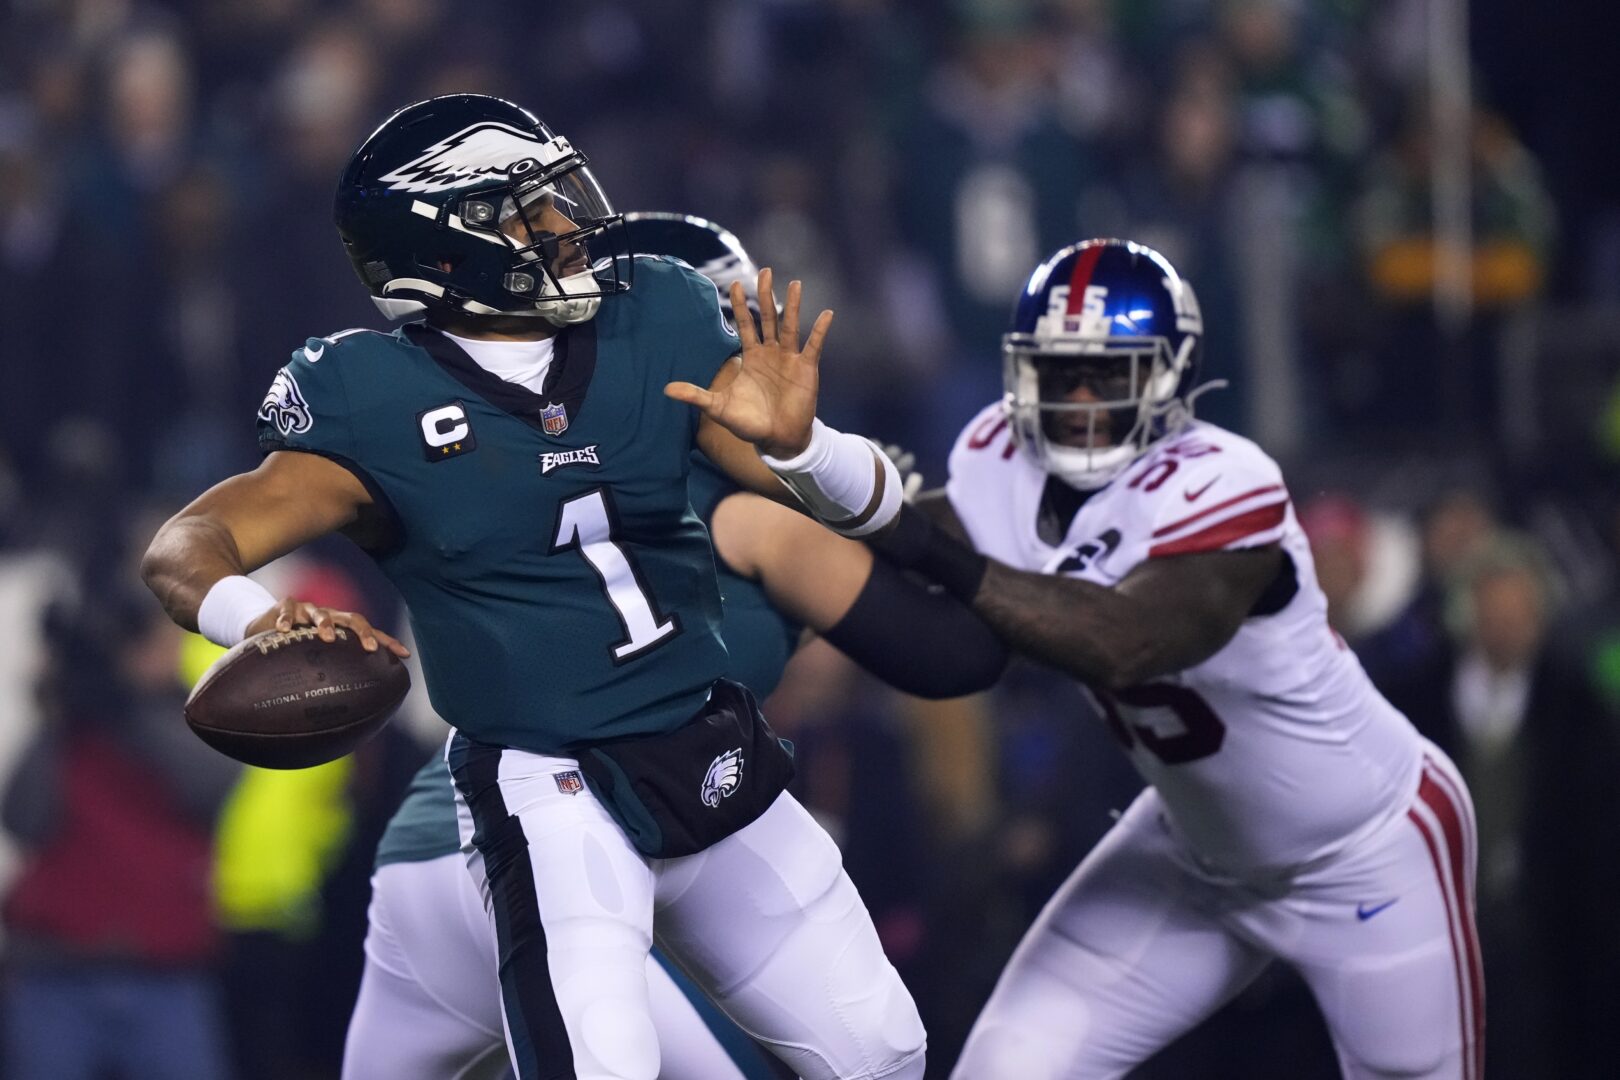 Philadelphia Eagles quarterback Jalen Hurts (1) throws a pass as New York Giants linebacker Jihad Ward (55) tries to rush in on him during the first half of an NFL divisional round playoff football game, Saturday, Jan. 21, 2023, in Philadelphia. (AP Photo/Matt Rourke)